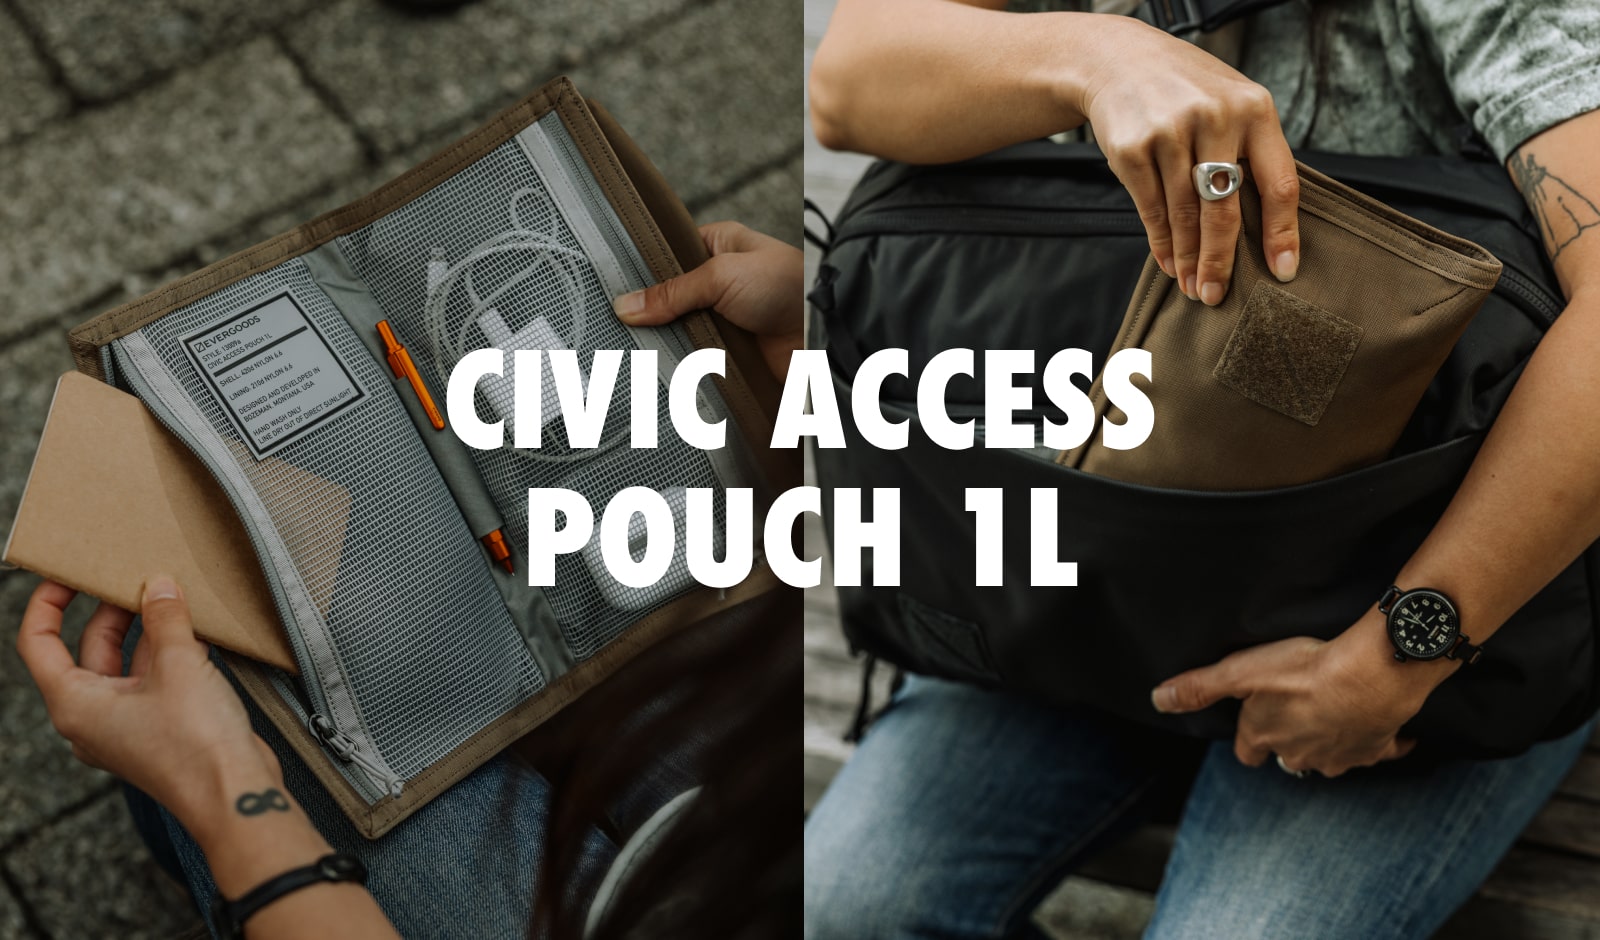 CIVIC Access Pouch 1L in Coyote Brown